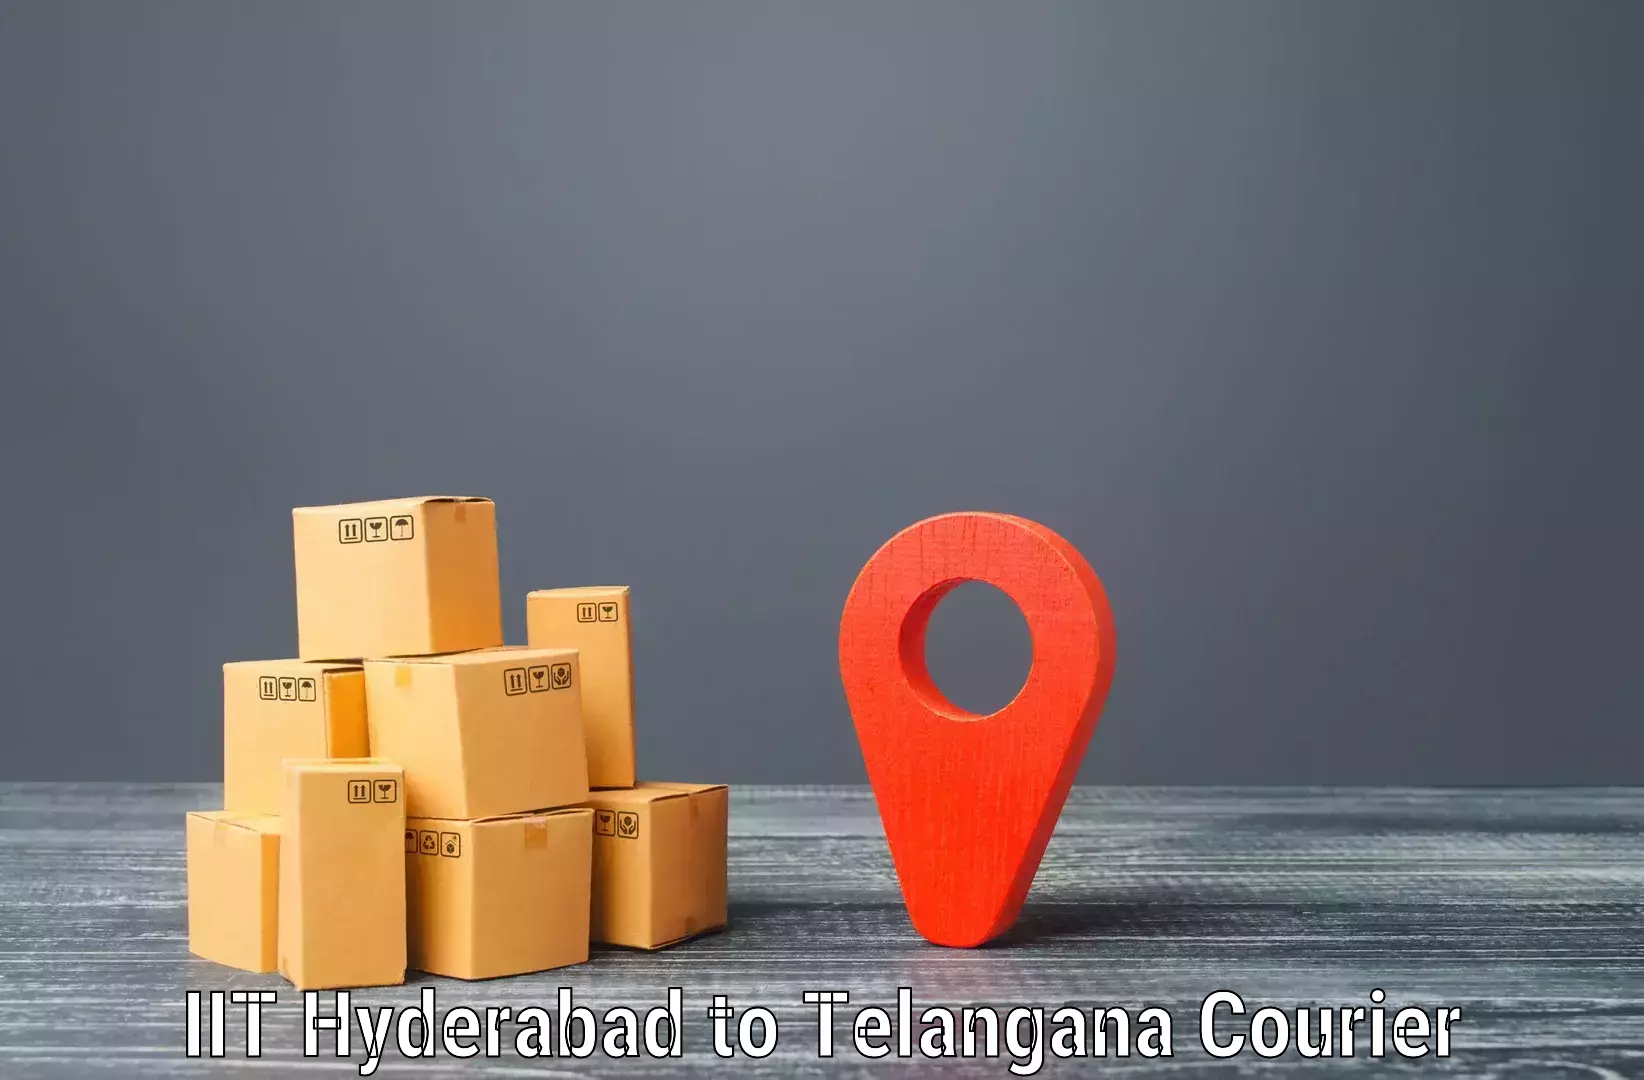 Express delivery network IIT Hyderabad to Kollapur